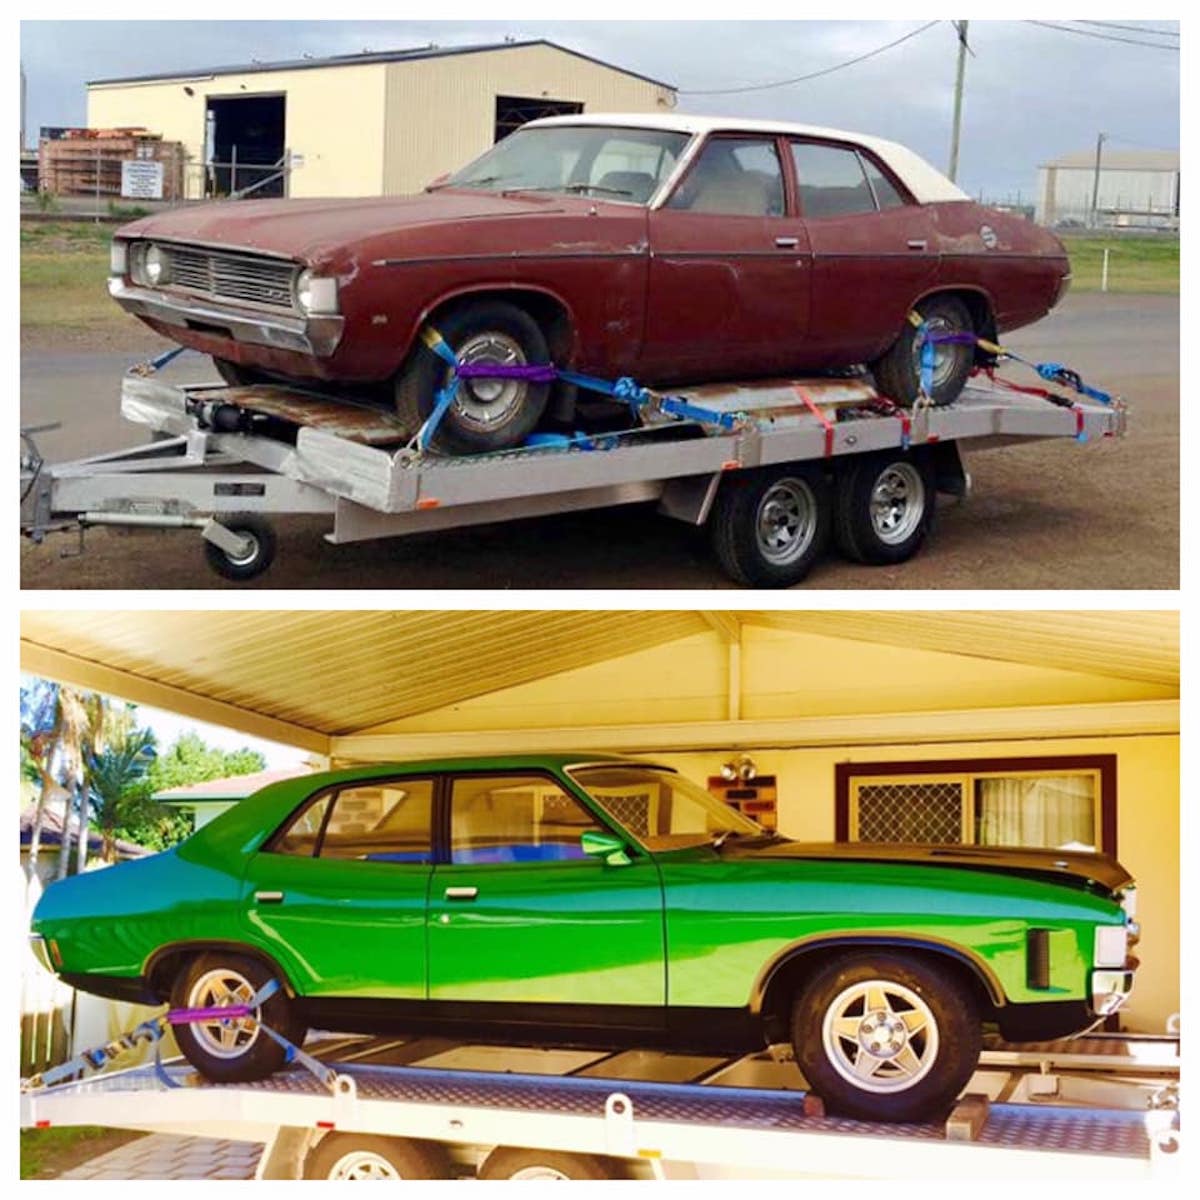 Reviving Old Cars